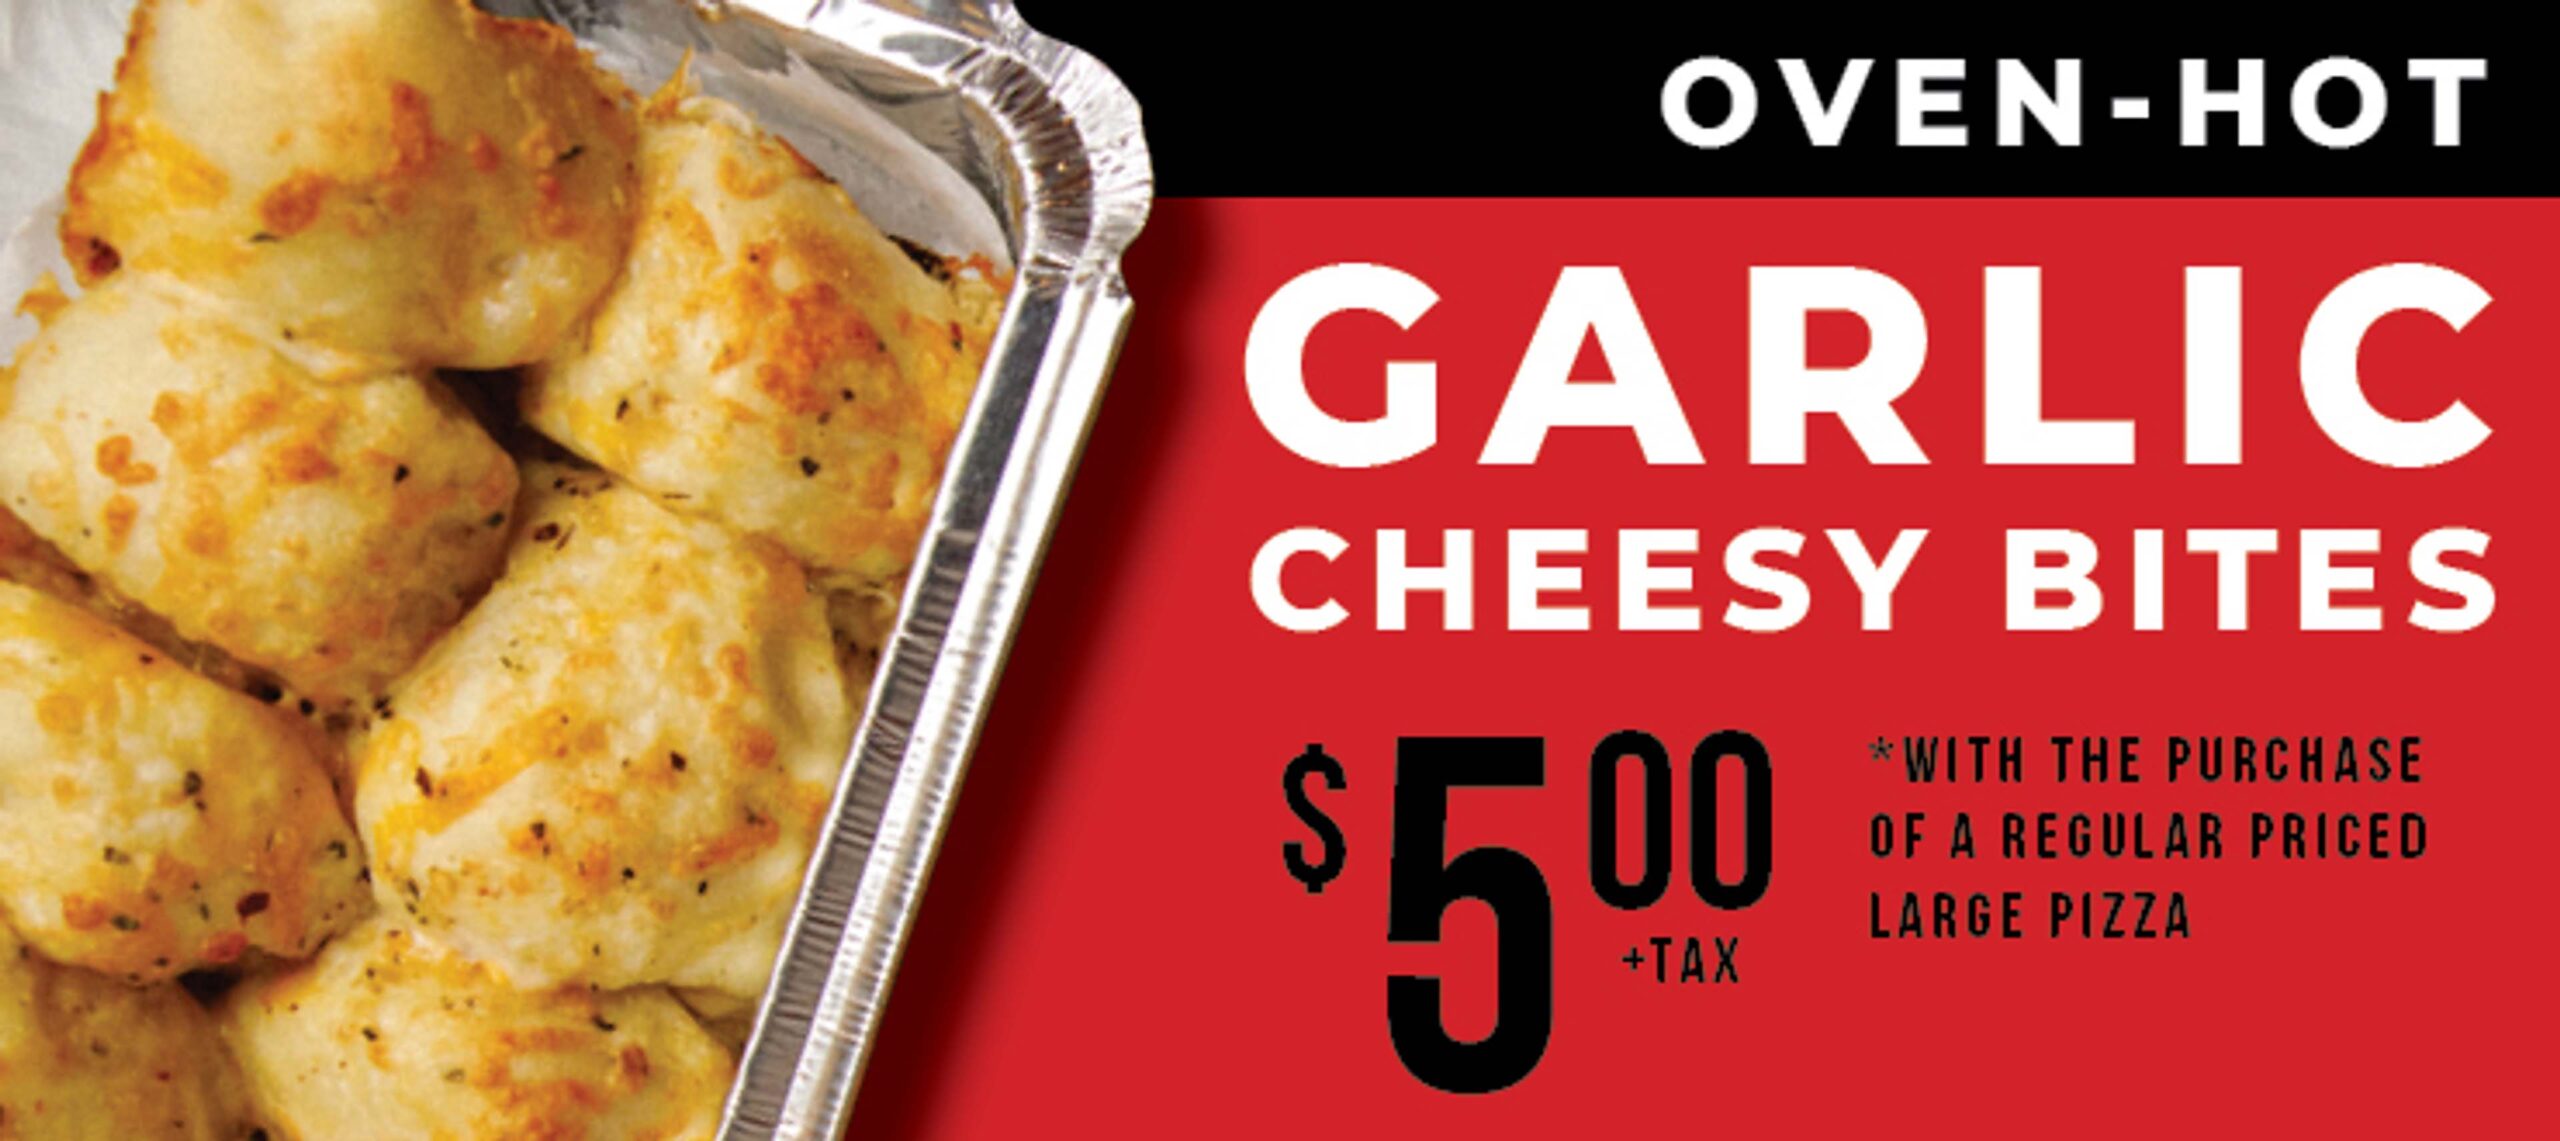 Oven-Hot Garlic Cheesy Bites $5.00 +tax *with the purchase of a regular priced large pizza